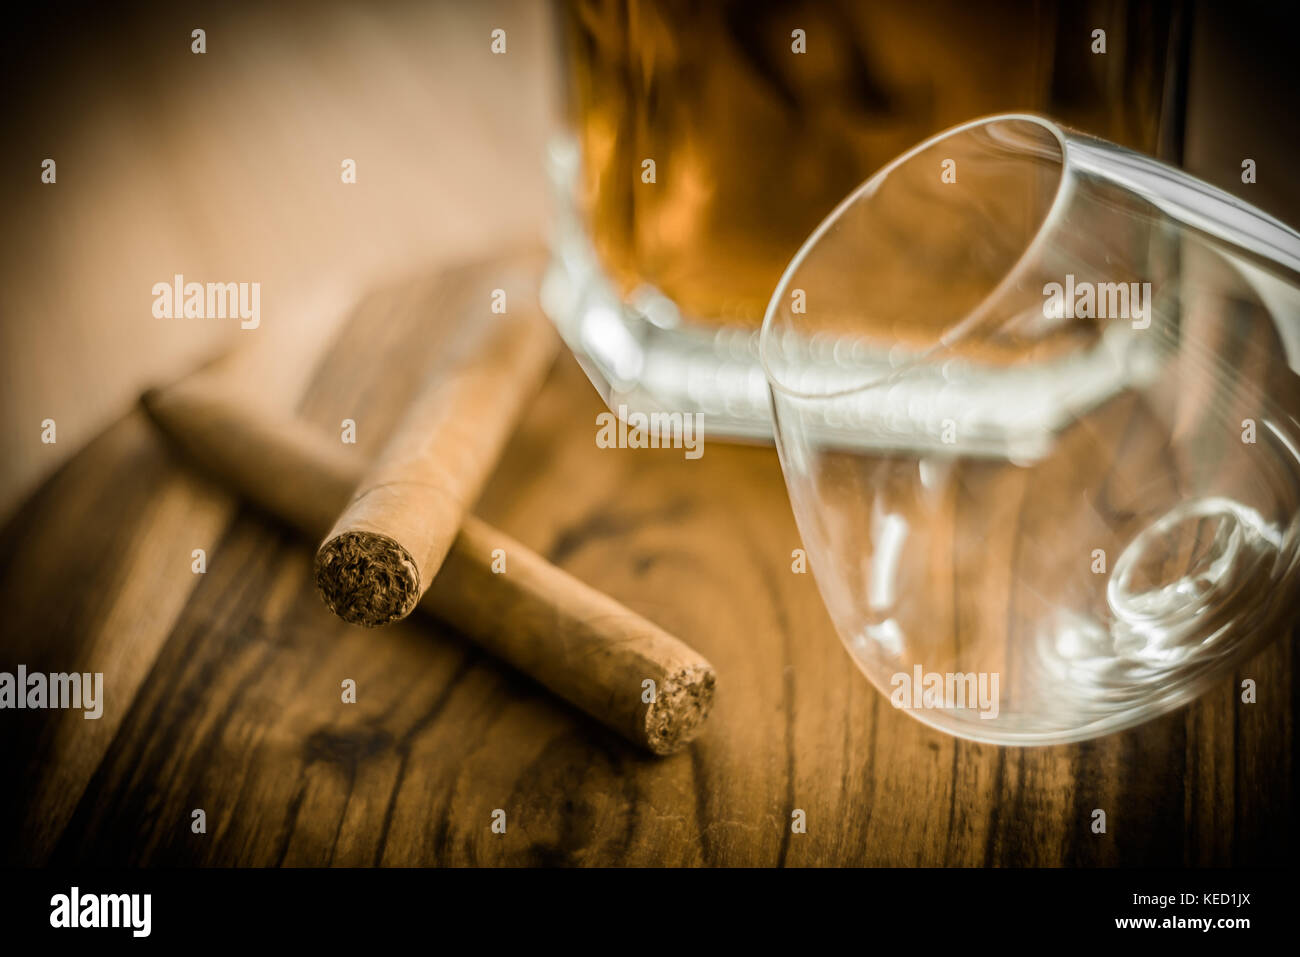 Close up of two cigars, a glass and a bottle of rum on a wooden surface Stock Photo